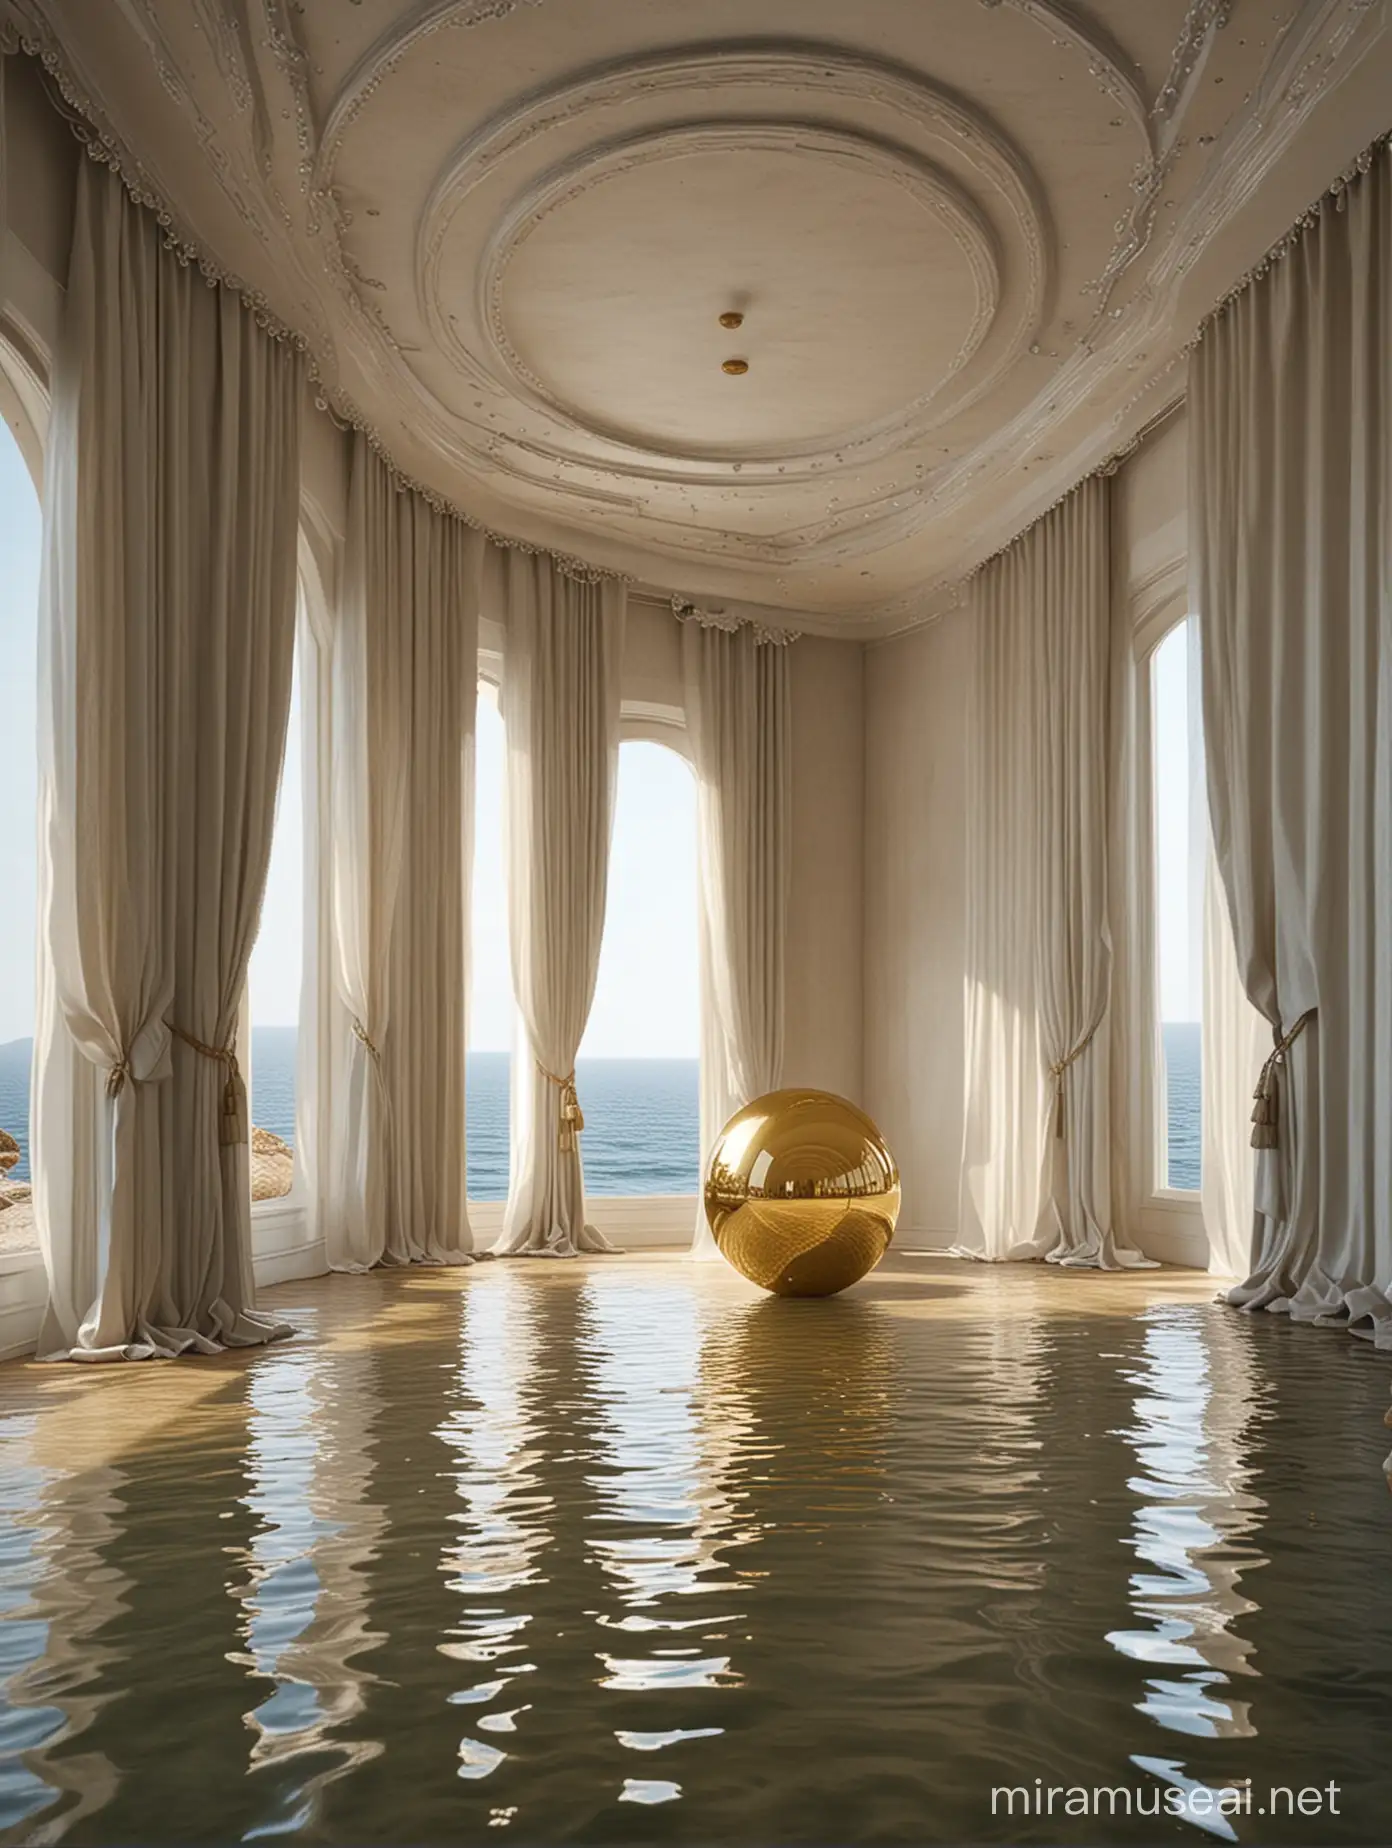 Sculptural Tranquility Golden Sphere in Curtain Room with Water Floor